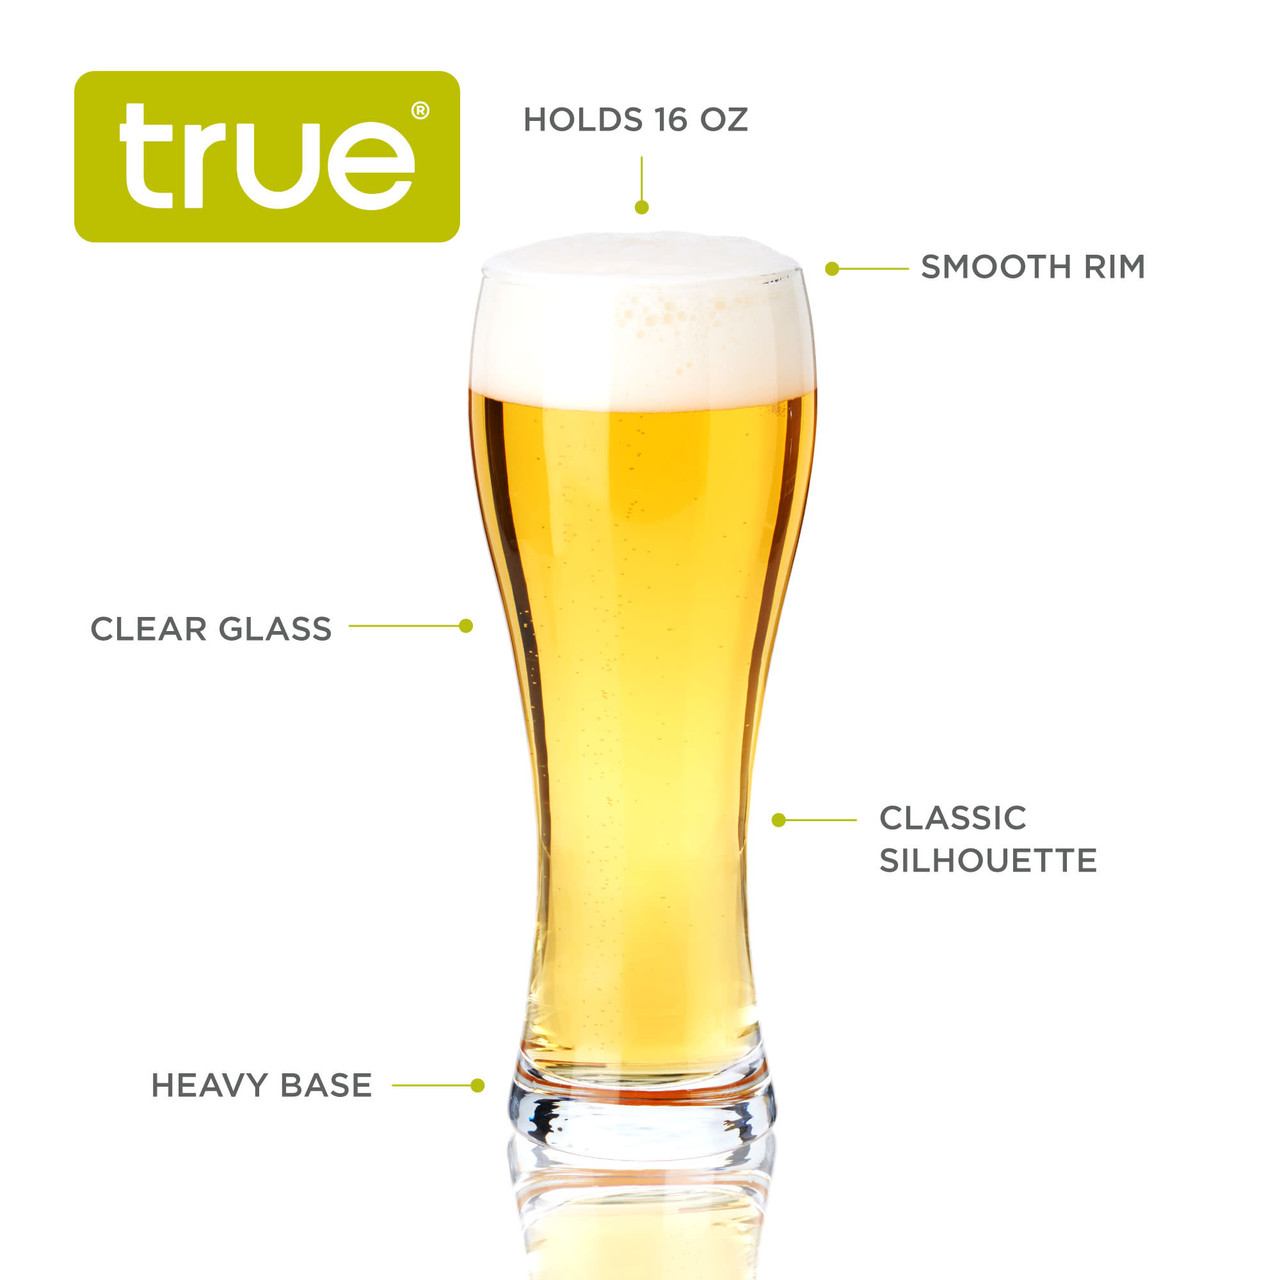 https://cdn11.bigcommerce.com/s-oo0gdojvjo/images/stencil/1280x1280/products/68500/101586/wheat-beer-glasses-by-true-set-of-4-3__71958.1683797258.jpg?c=2&imbypass=on